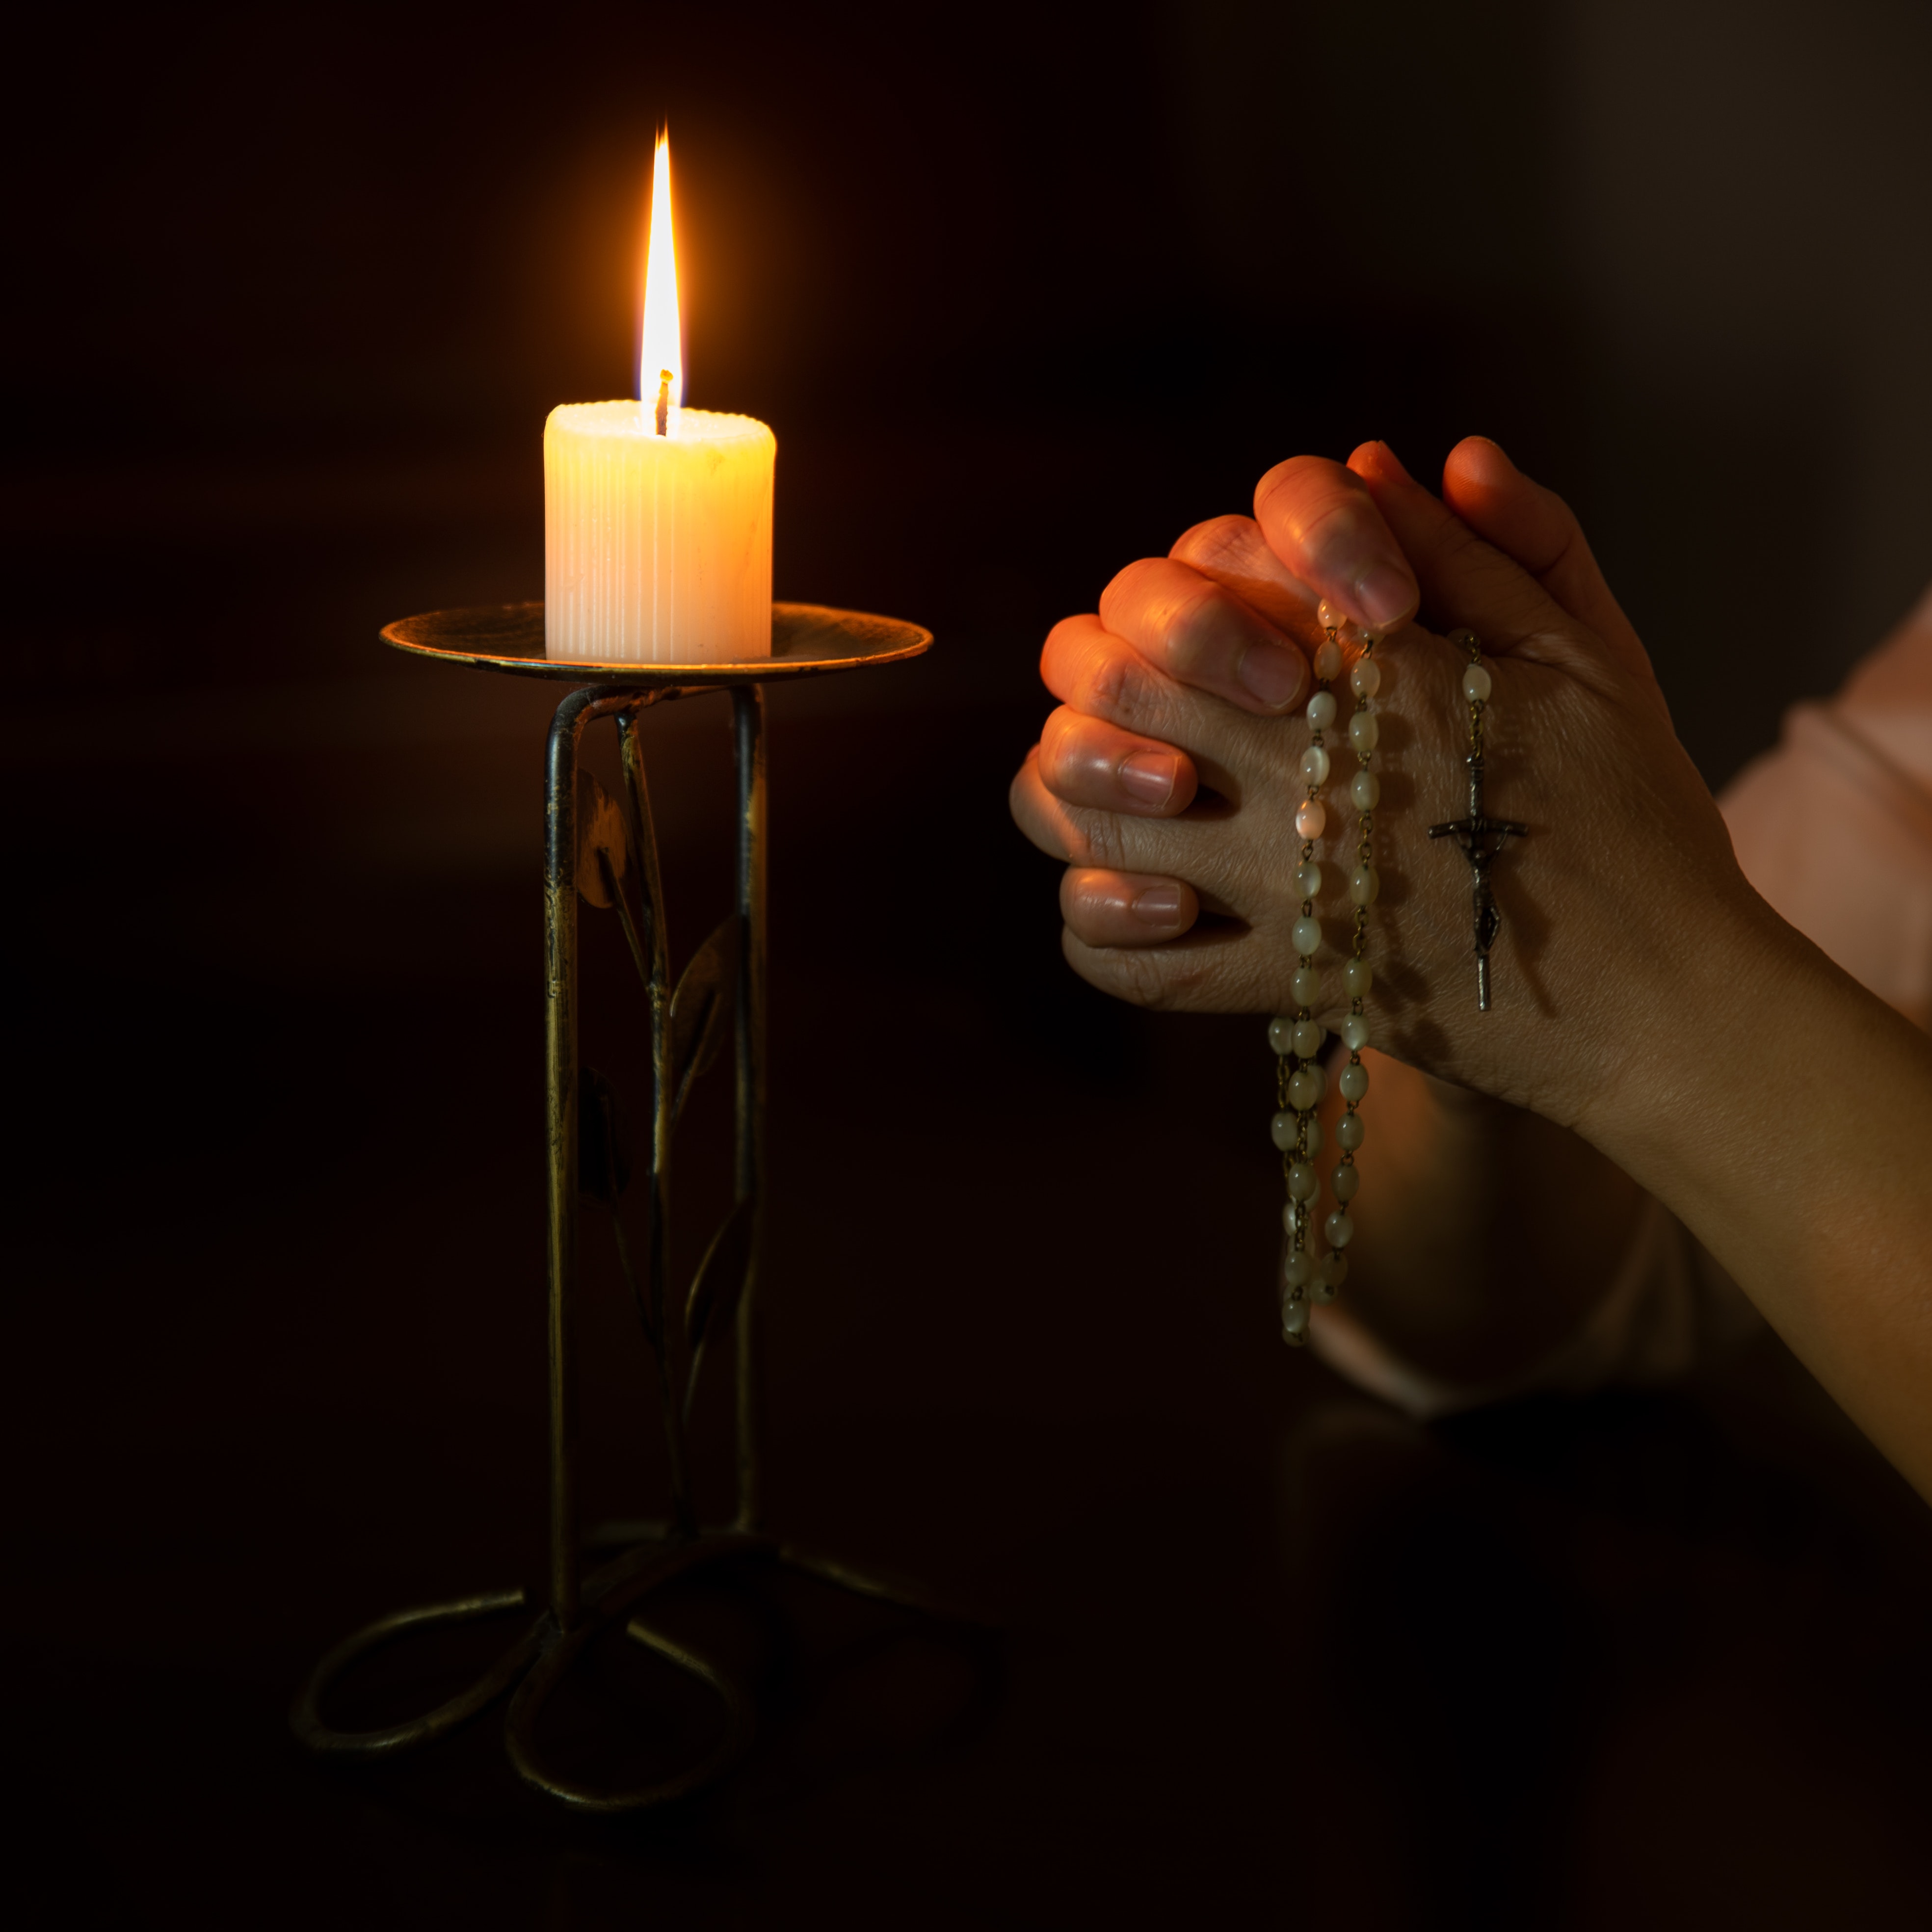 Praying hands holding a rosary, next to a lit candle